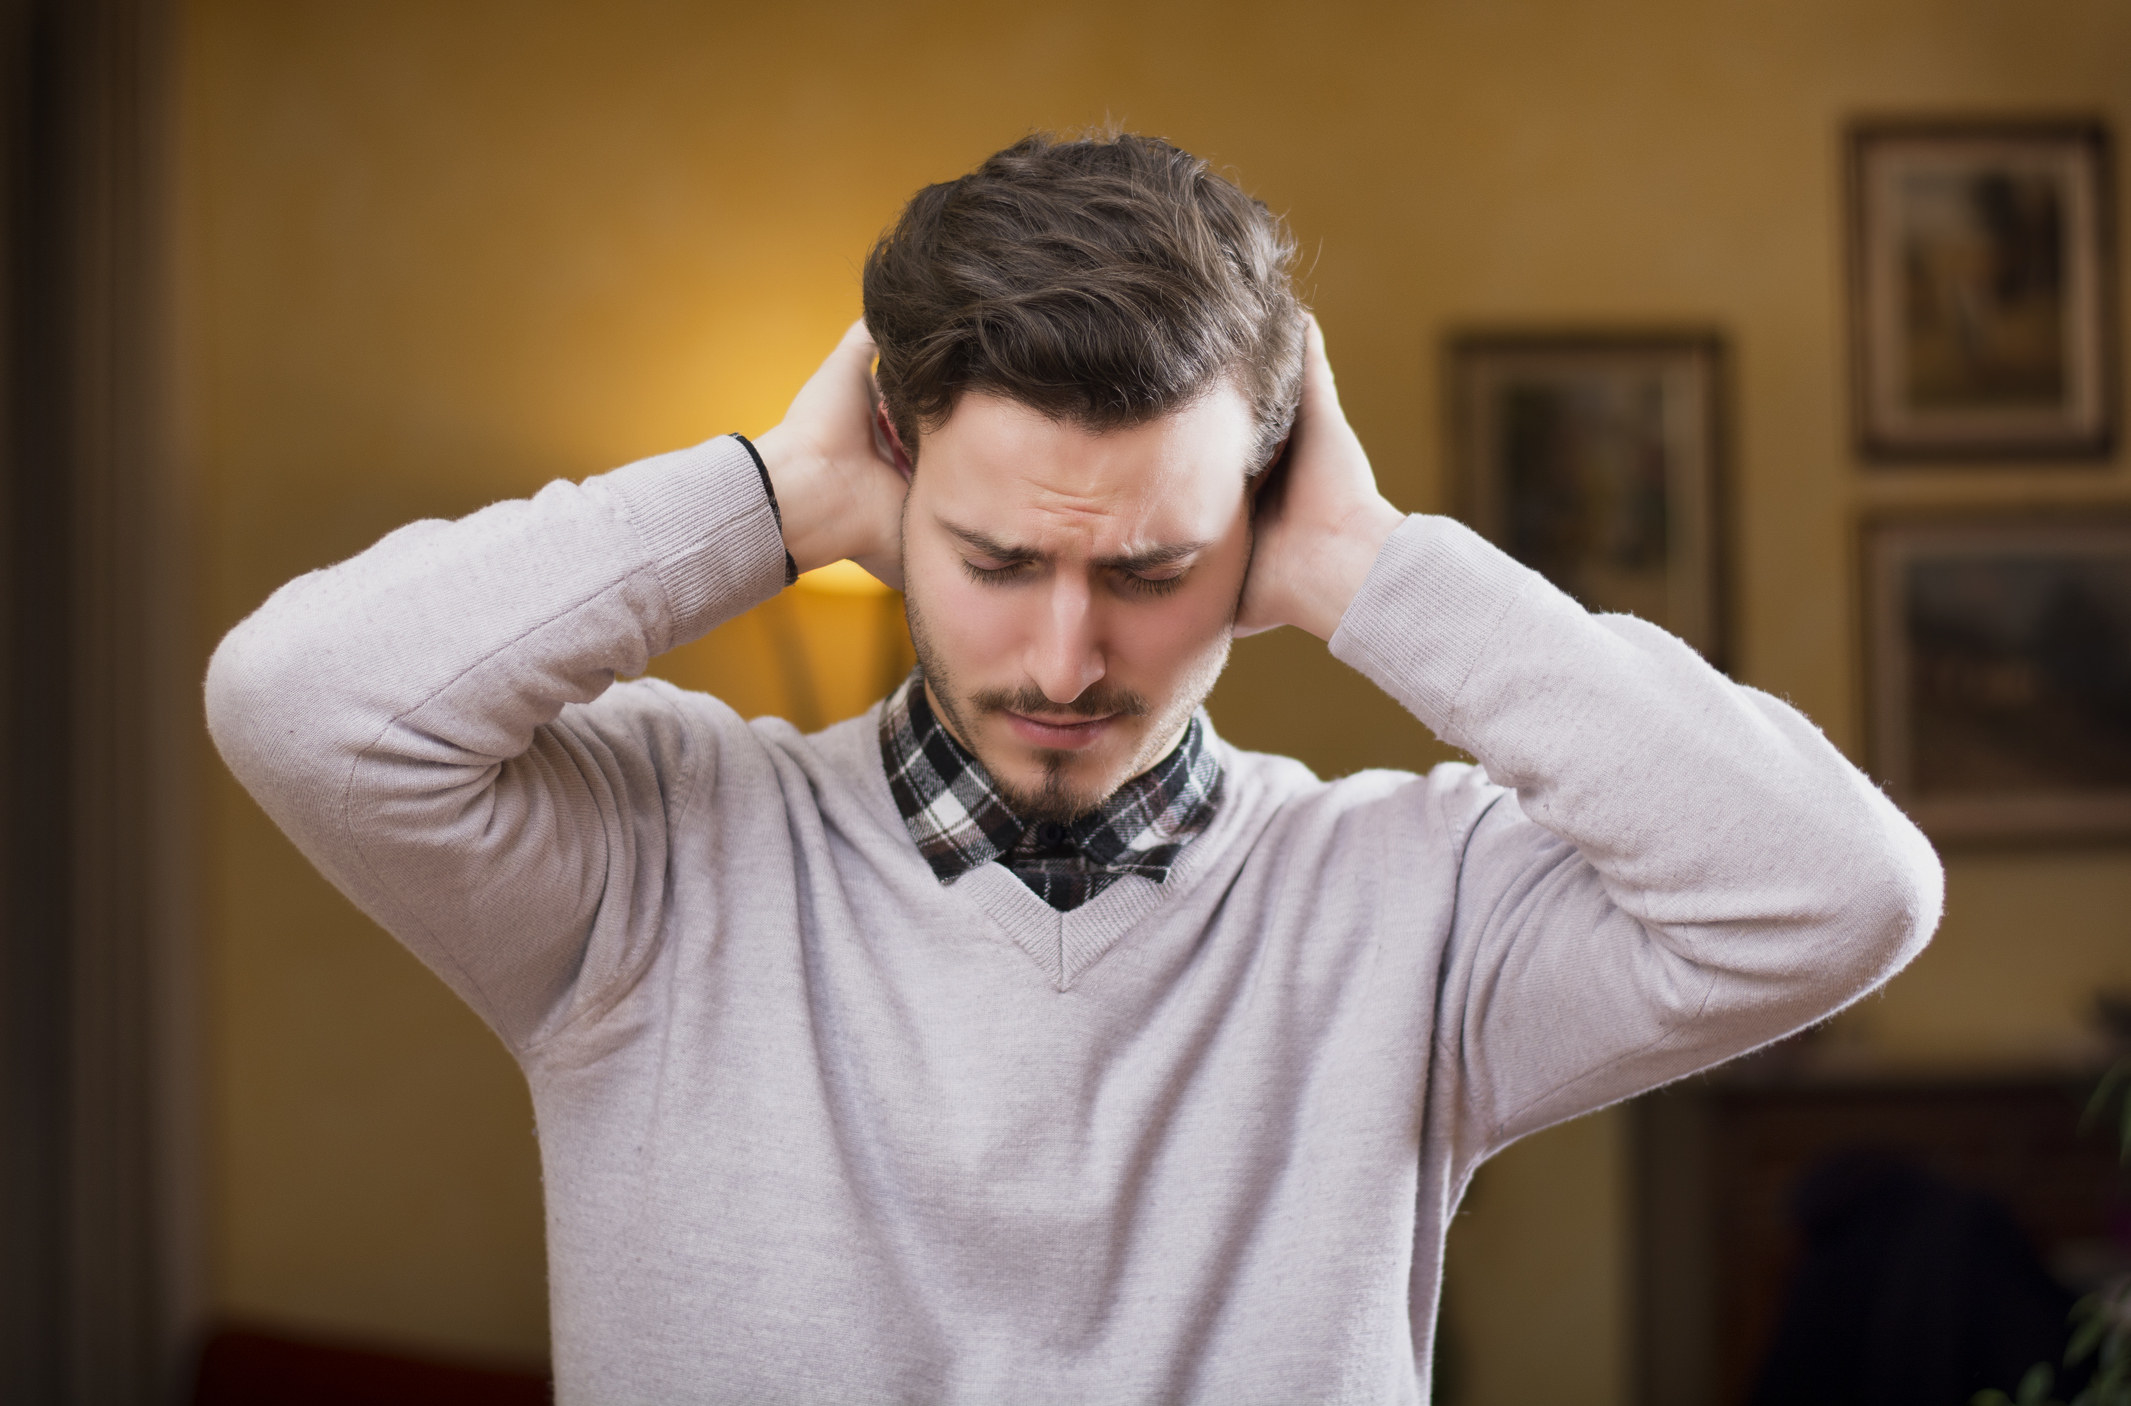 Man covering his ears, stressed or unhappy because of too much noise.